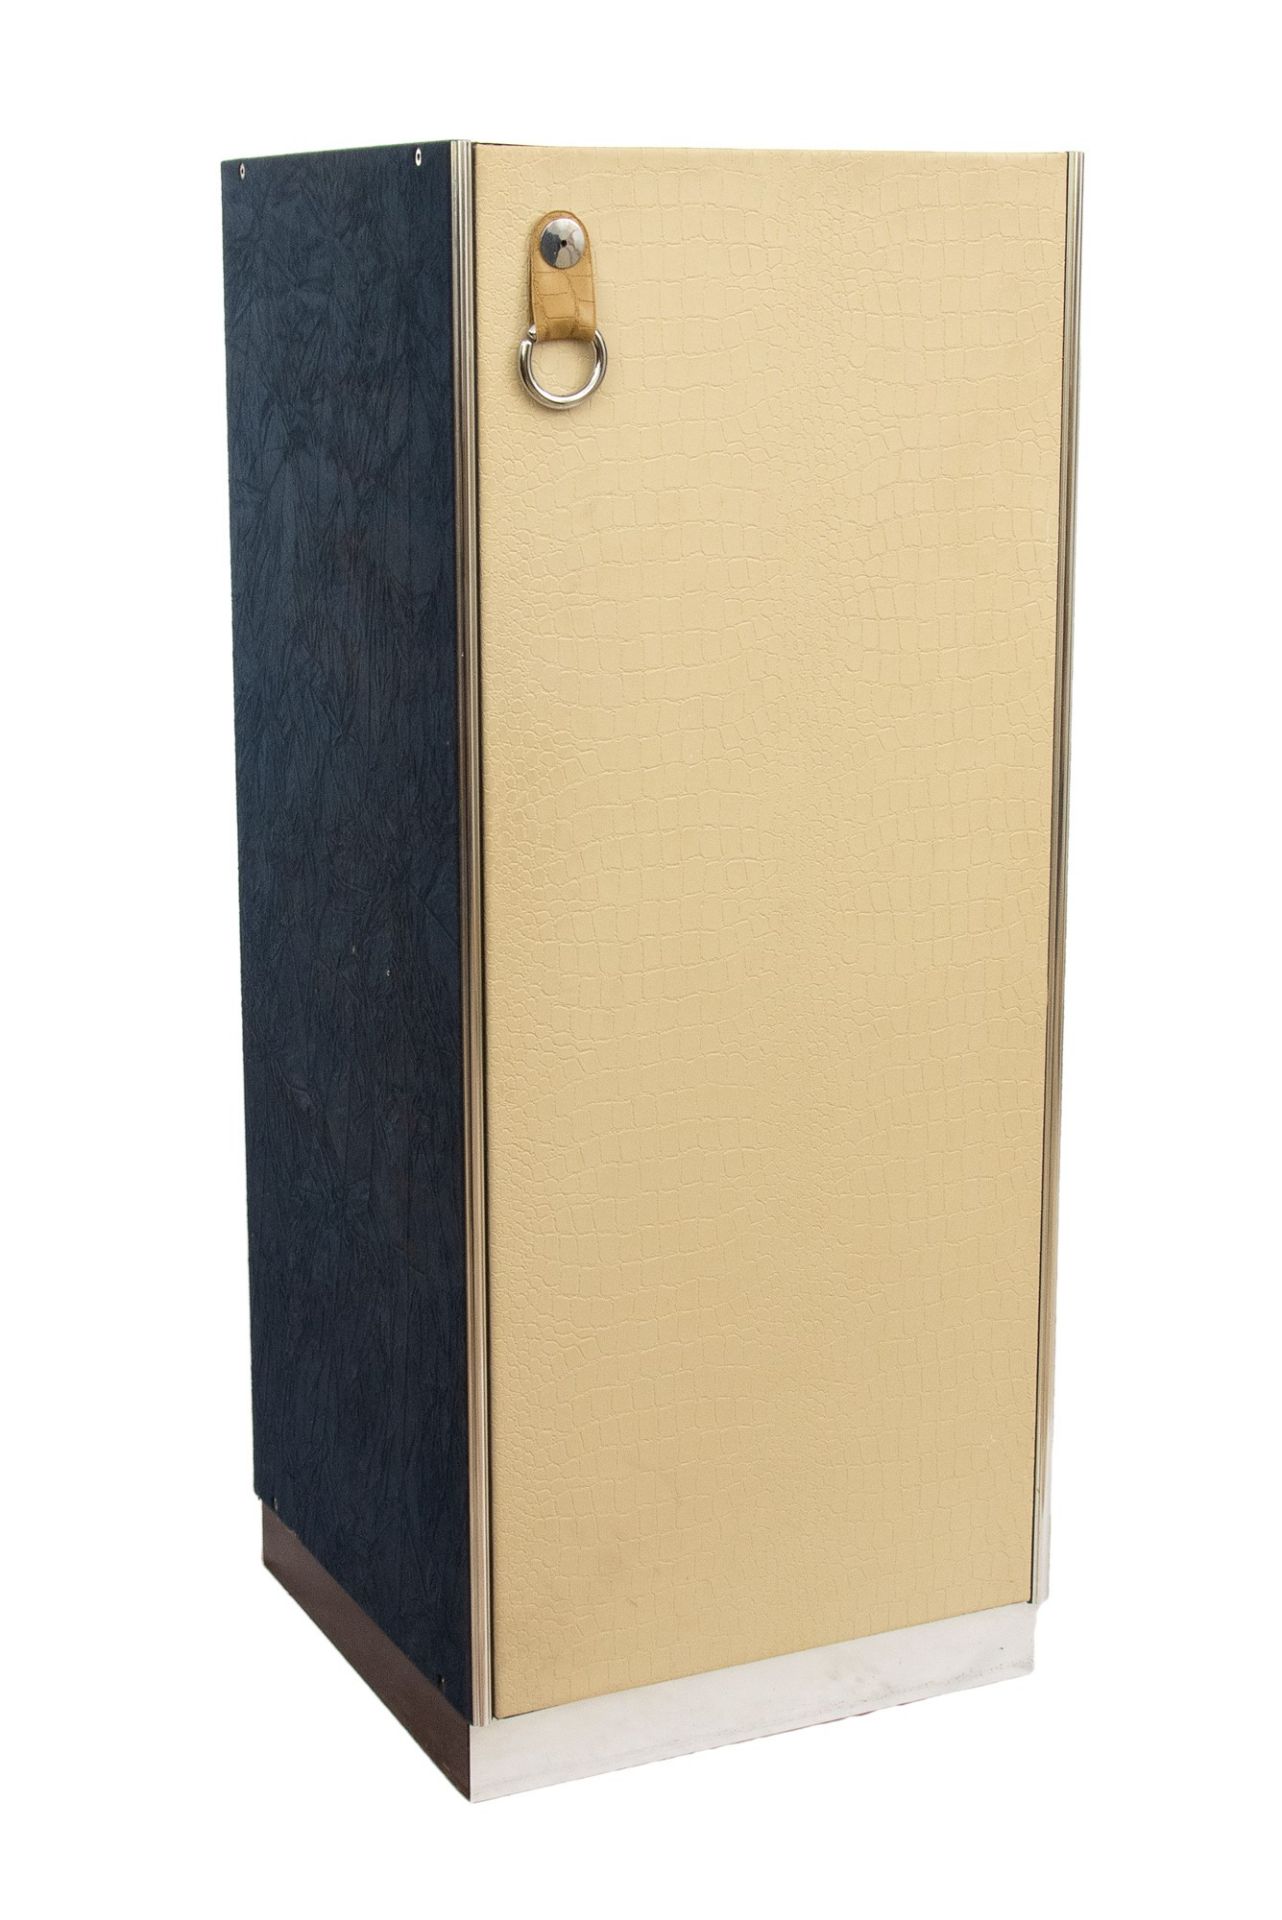 Guido Faleschini 4 modules wooden wardrobe covered in blue suede and white leather. Steel handles - Image 4 of 11